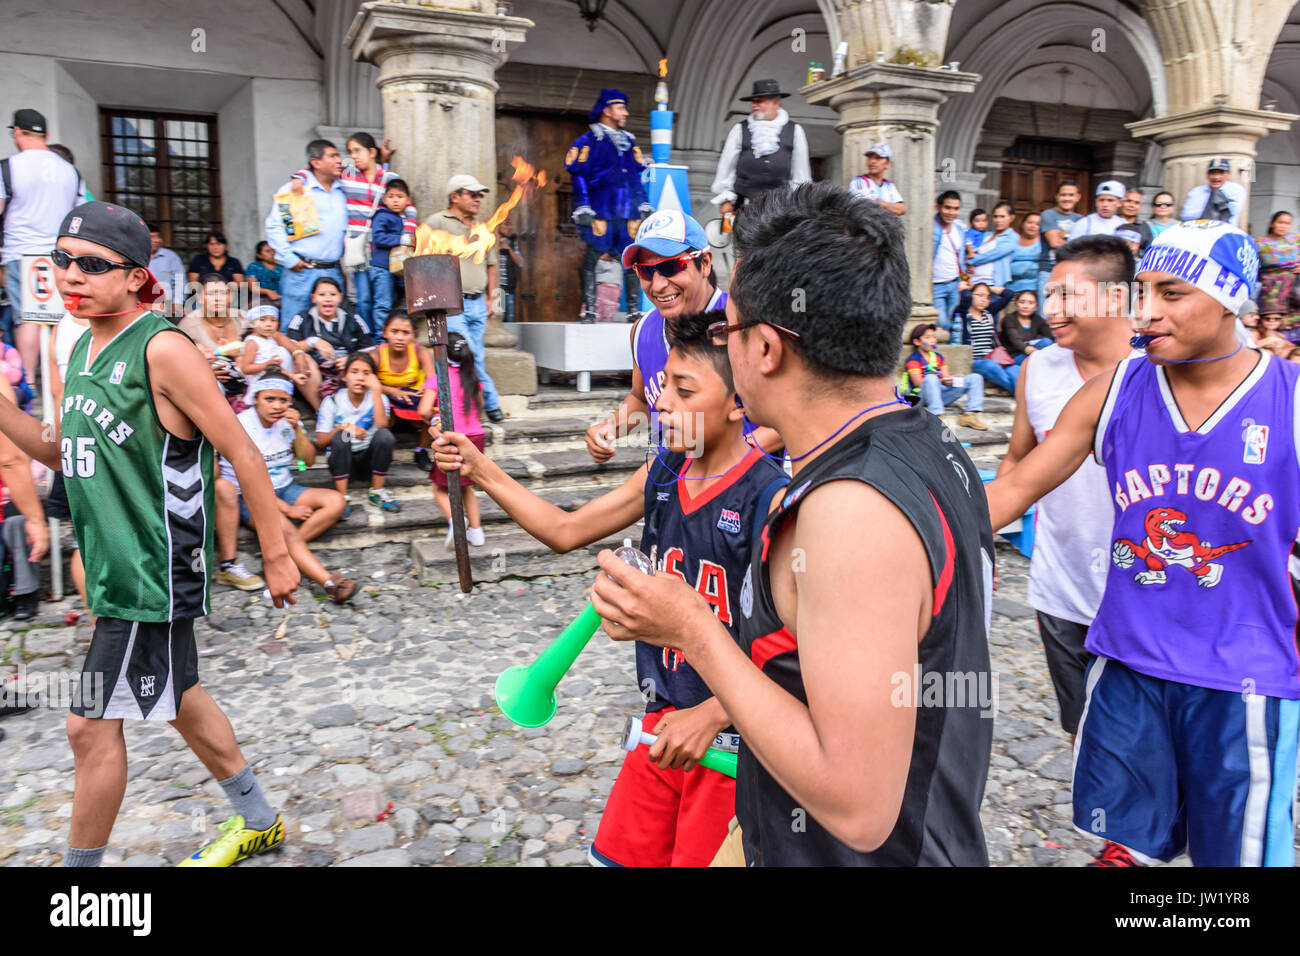 Antigua, Guatemala - September 14, 2015: Locals run with lit torches & blow whistles & horns during Guatemalan Independence Day celebrations Stock Photo